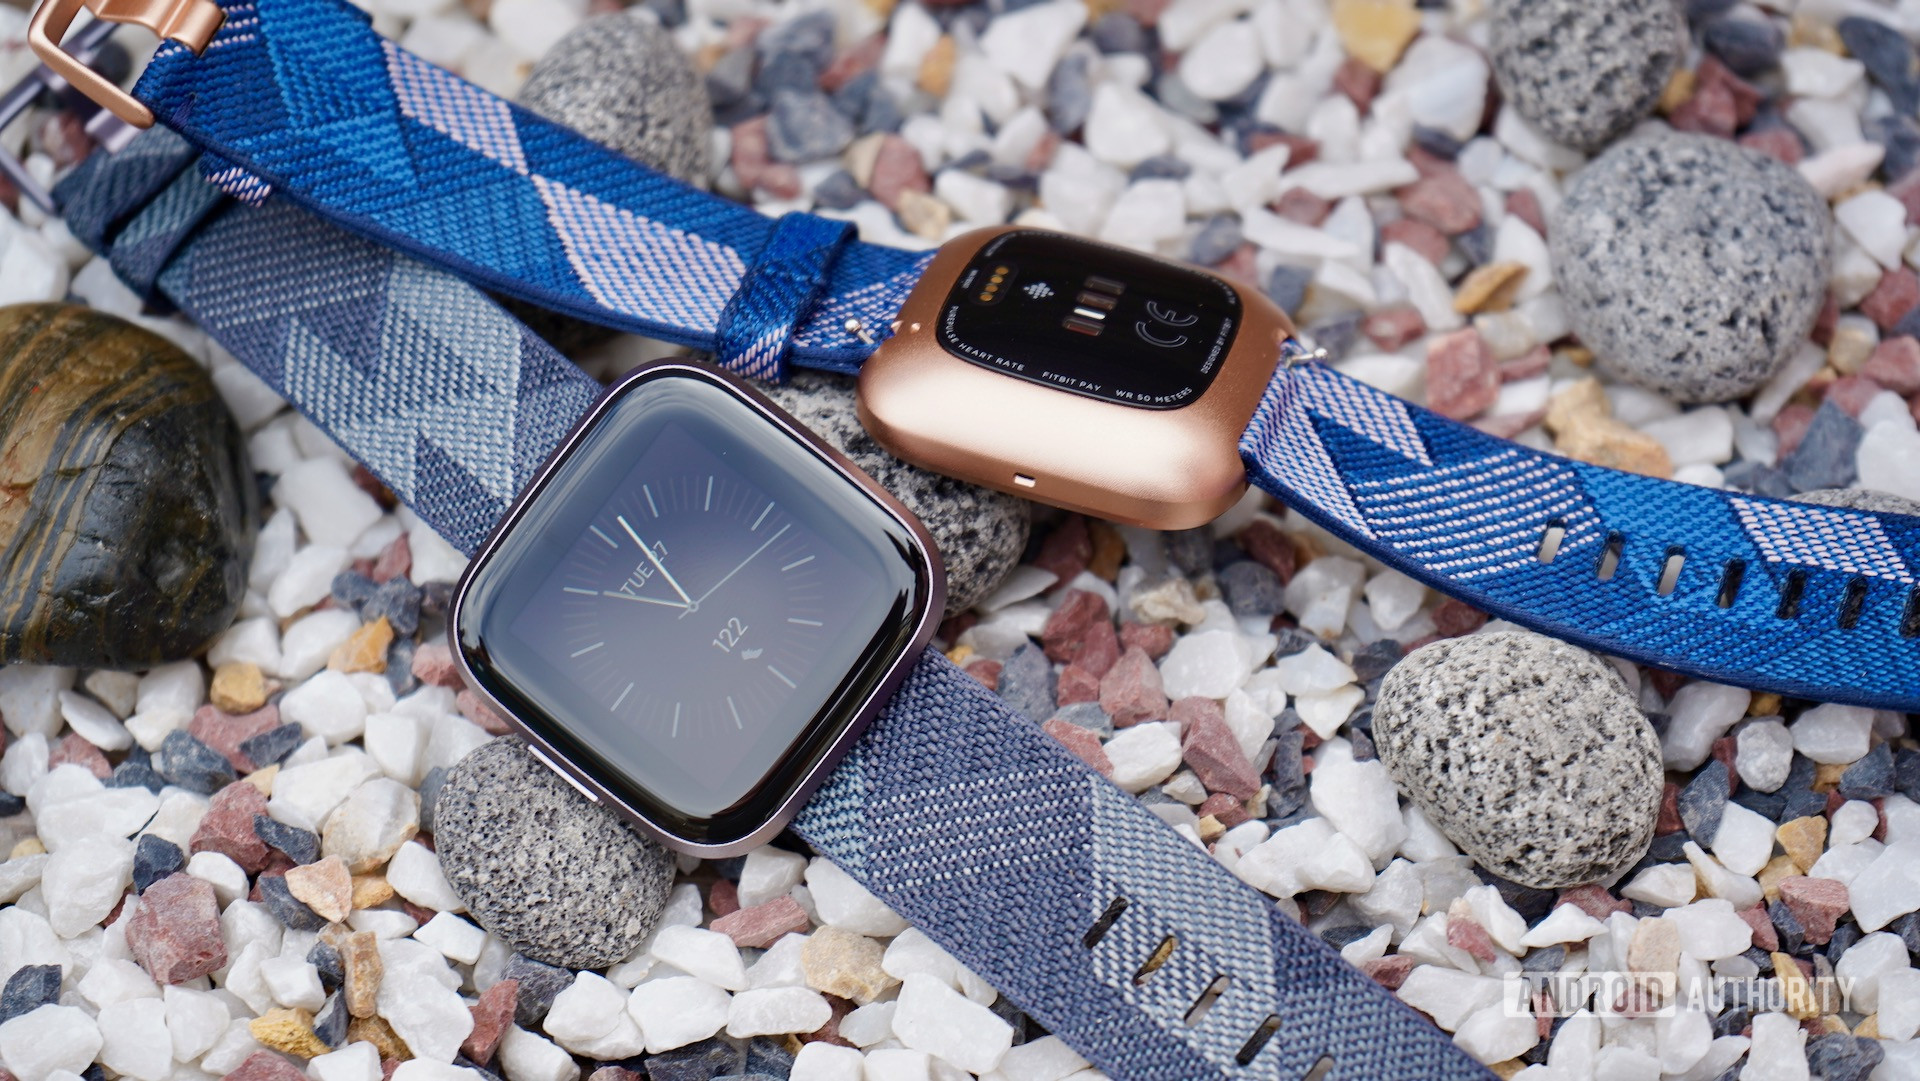 what is special about the fitbit versa 2 special edition